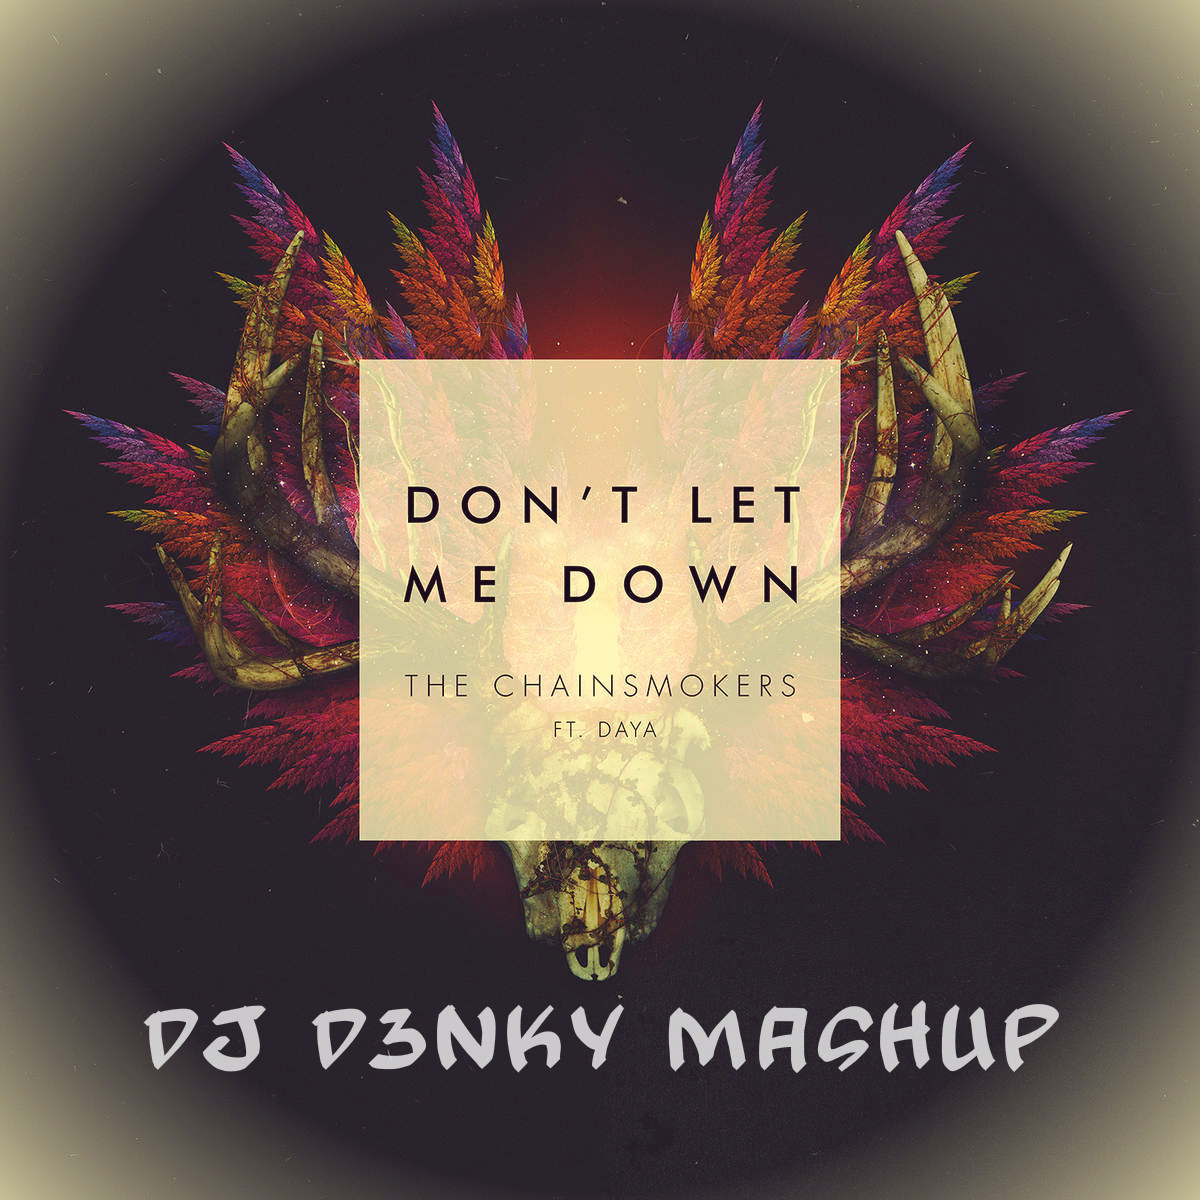 The Chainsmokers feat. Daya. Daya don't Let me down. The Chainsmokers feat Cheyenne Giles - make me feel. The Chainsmokers feat Cheyenne Giles - make me feel Cover 1000x1000. The chainsmokers feat daya don